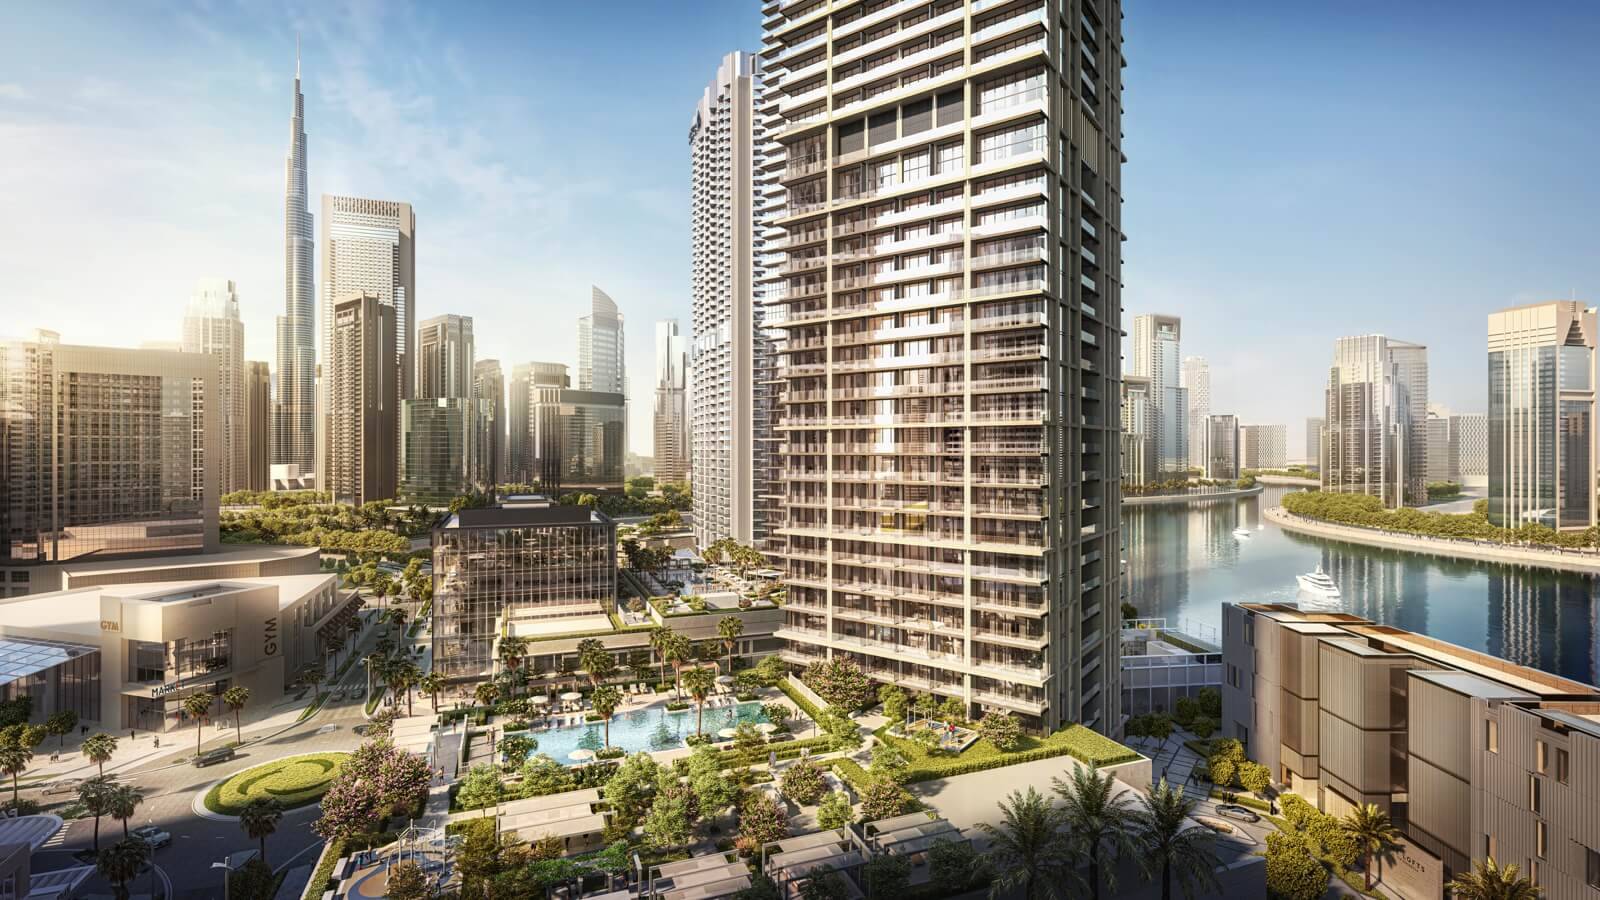 4-BEDROOM APARTMENT AT THE PLAZA, DOWNTOWN DUBAI'S WATERFRONT GEM